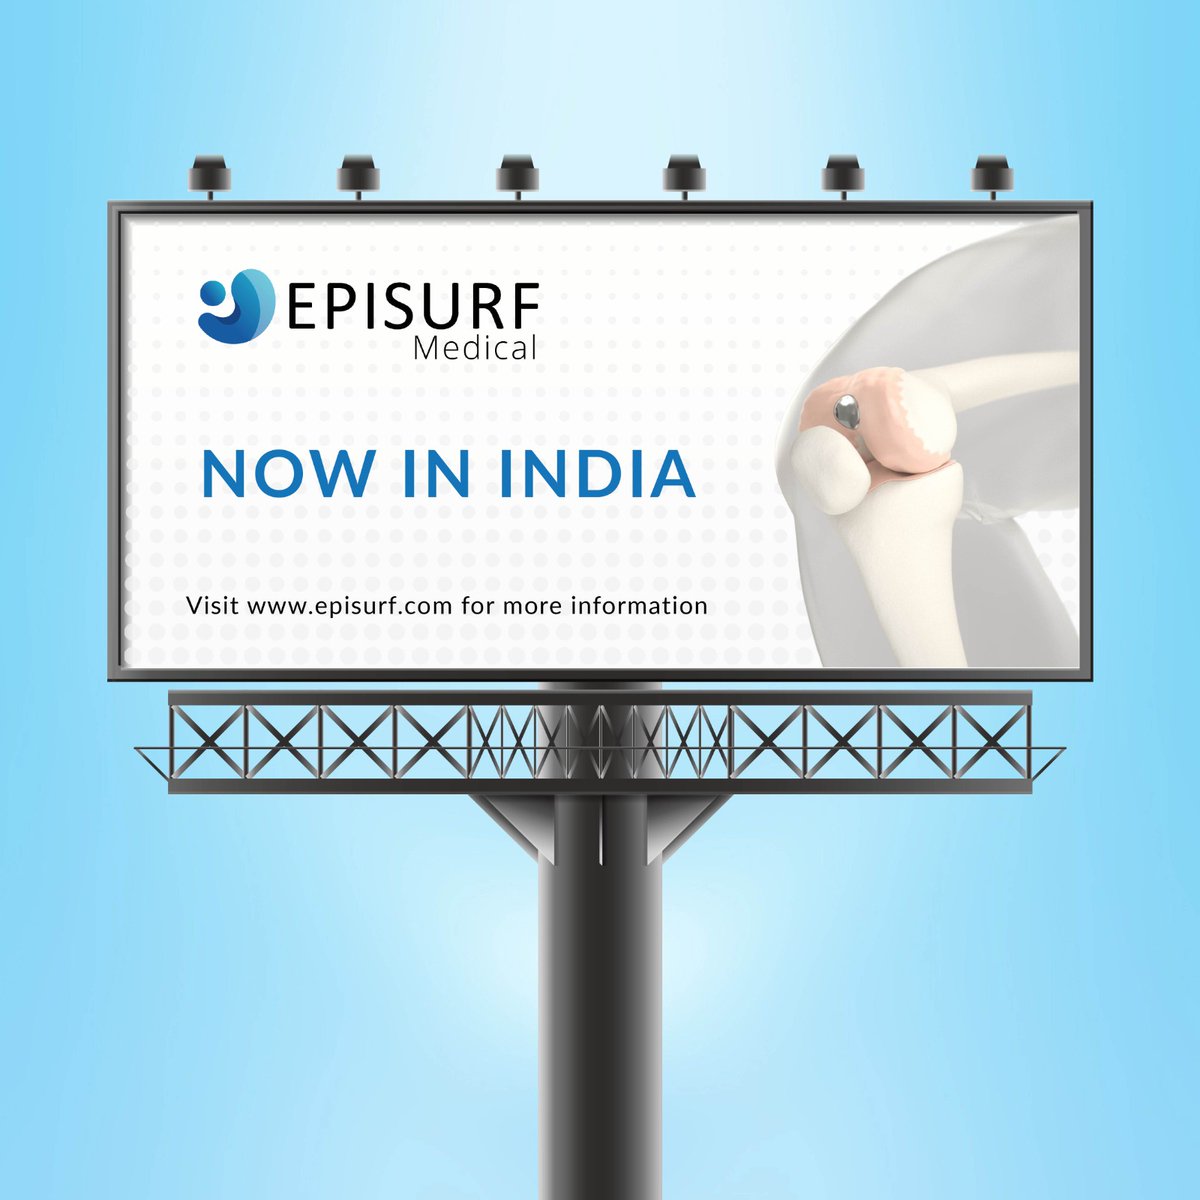 Pioneer and industry leader in individualised technology for the treatment of painful joint injuries, 𝗘𝗽𝗶𝘀𝘂𝗿𝗳 𝗠𝗲𝗱𝗶𝗰𝗮𝗹 𝗡𝗢𝗪 𝗜𝗡 𝗜𝗡𝗗𝗜𝗔..

#episurfindia #nowinindia #episealer #orthopedicsurgery #kneesurgery #cartilage #medicaldevices #anklepain #footandankle